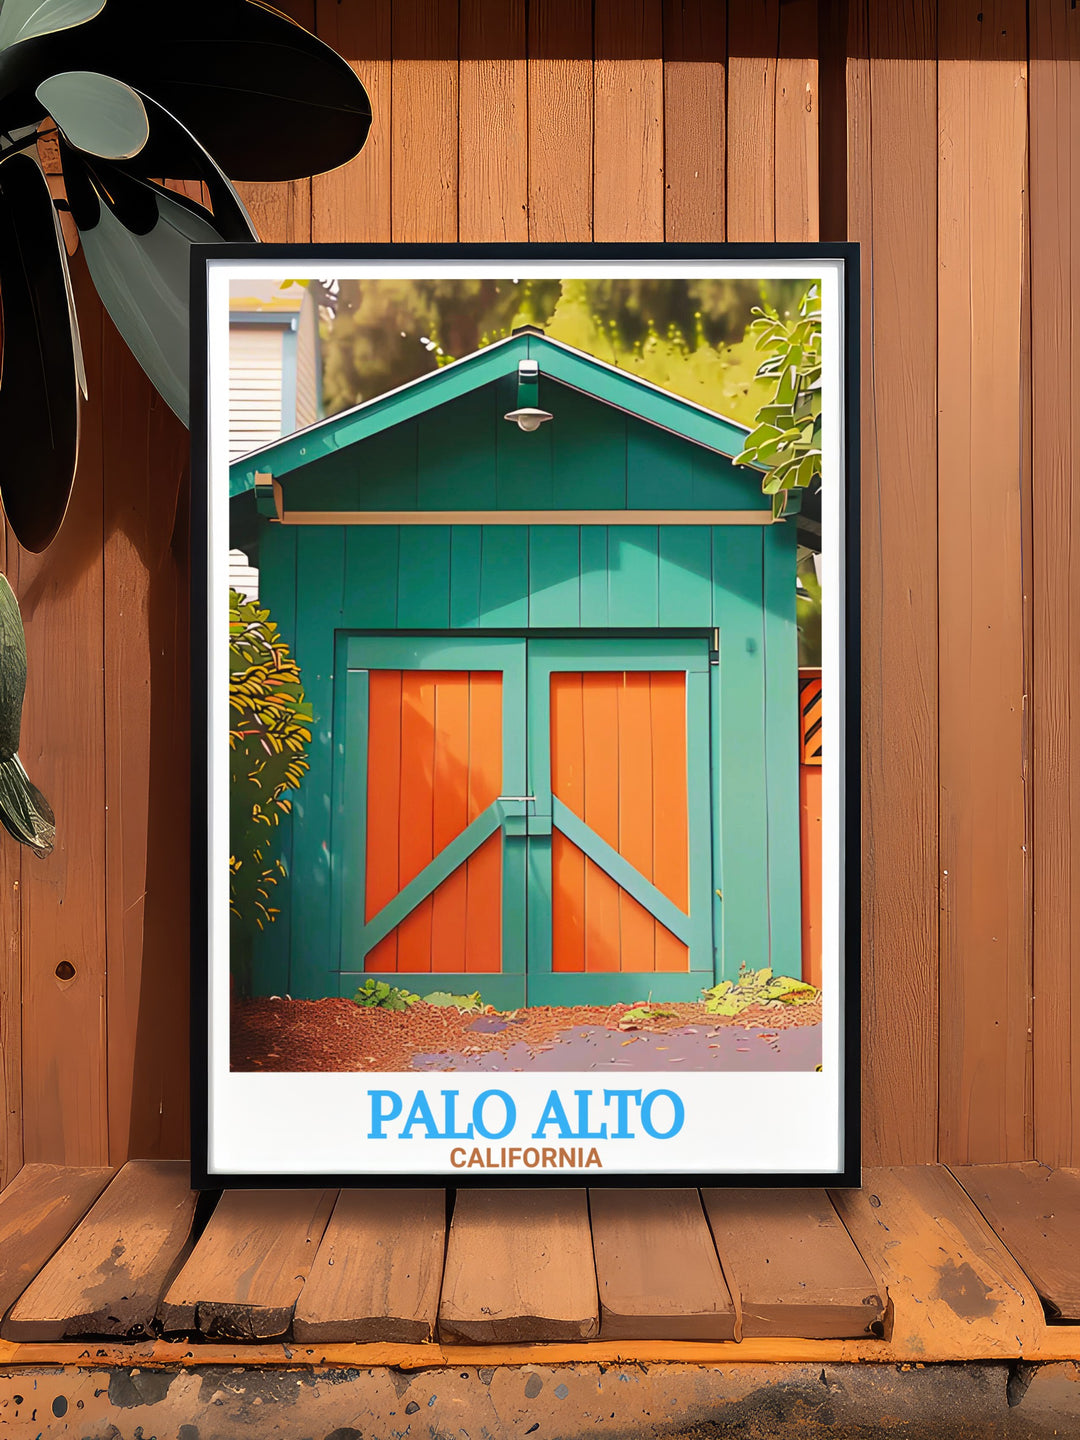 Vintage Palo Alto skyline poster including the Hewlett Packard Garage. This travel poster print features a detailed cityscape of Palo Alto with the historic Hewlett Packard Garage, making it a unique addition to home or office decor.